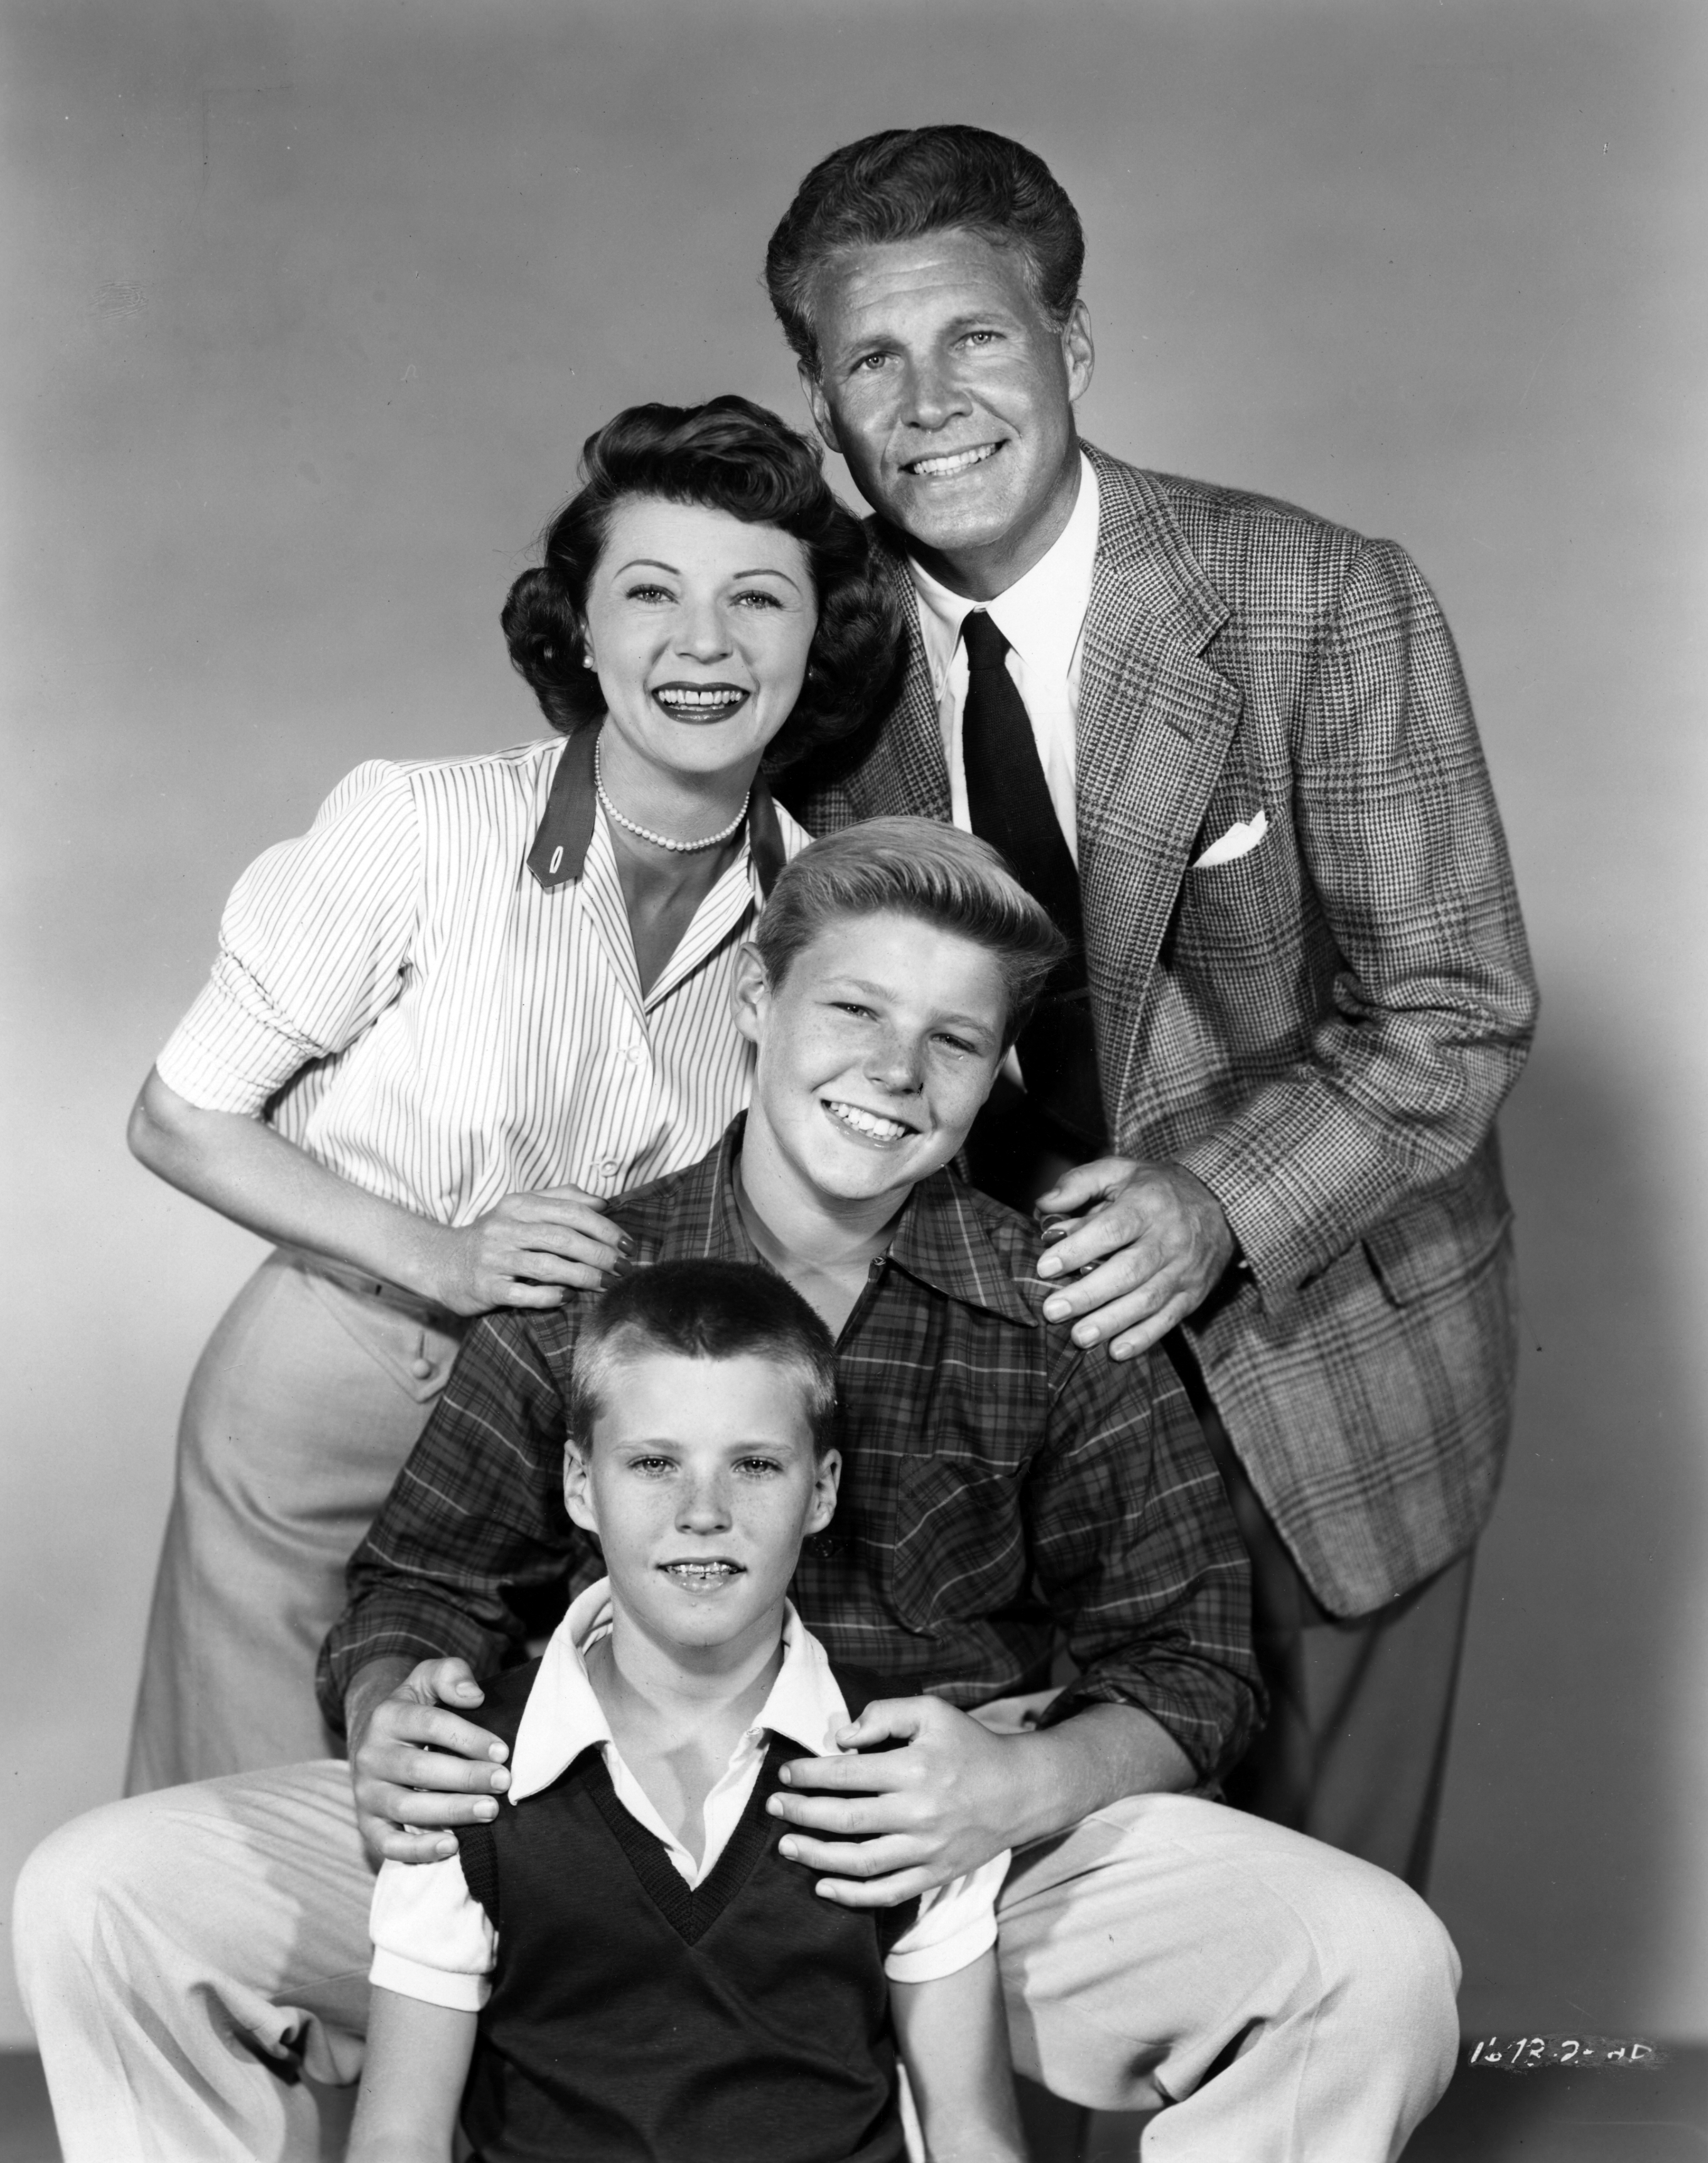 The singer's family portrait released in 1951 | Source: Getty Images